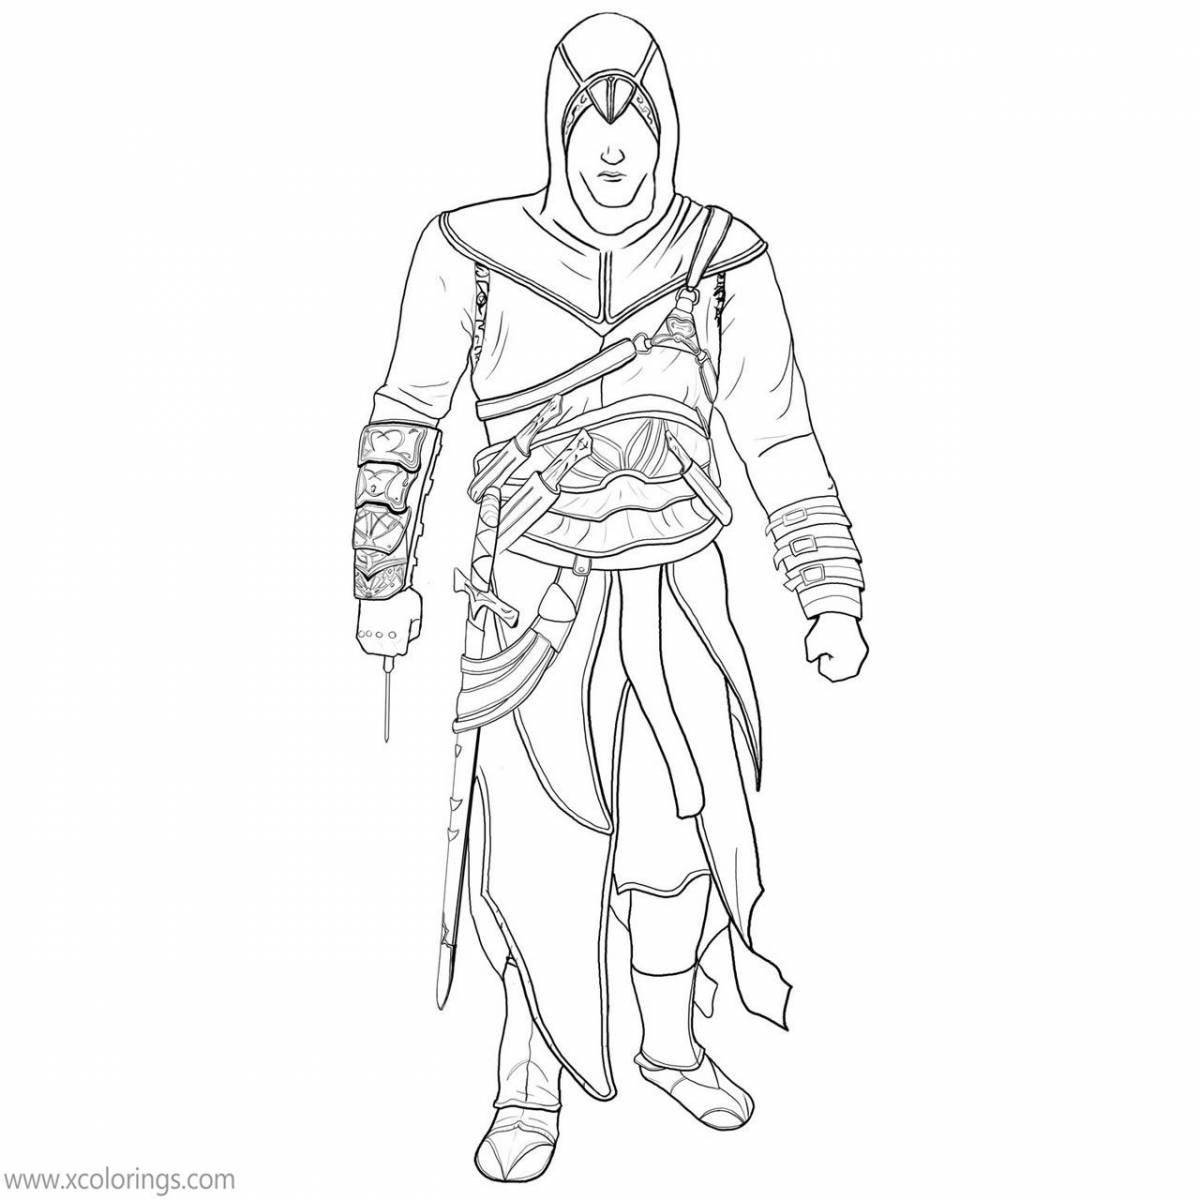 Playful unity coloring page